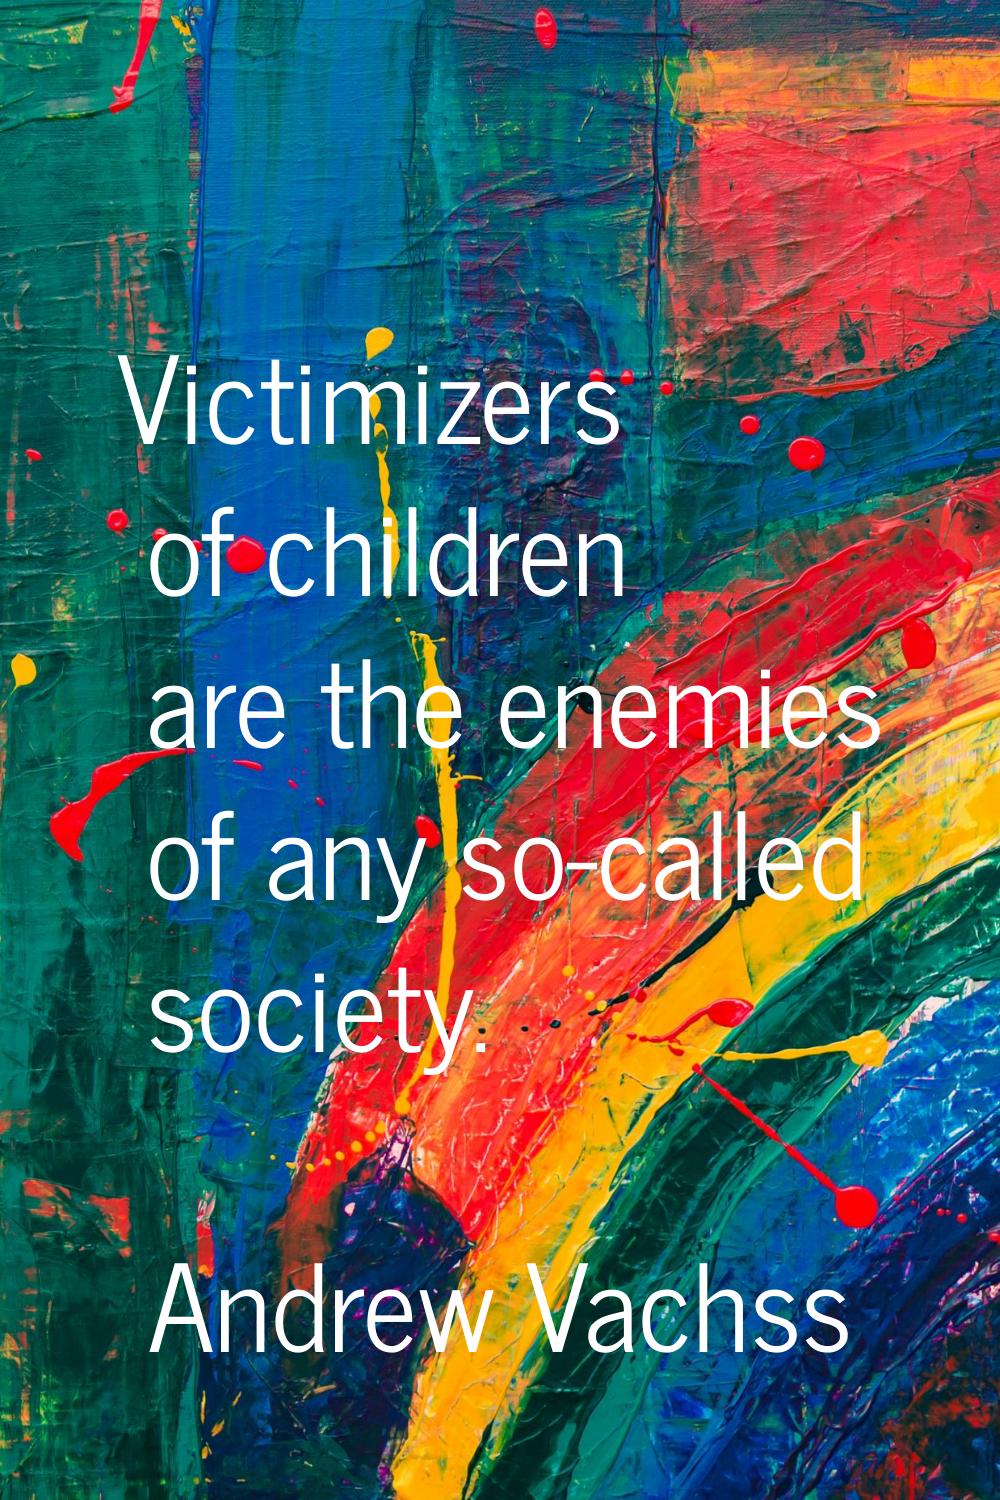 Victimizers of children are the enemies of any so-called society.